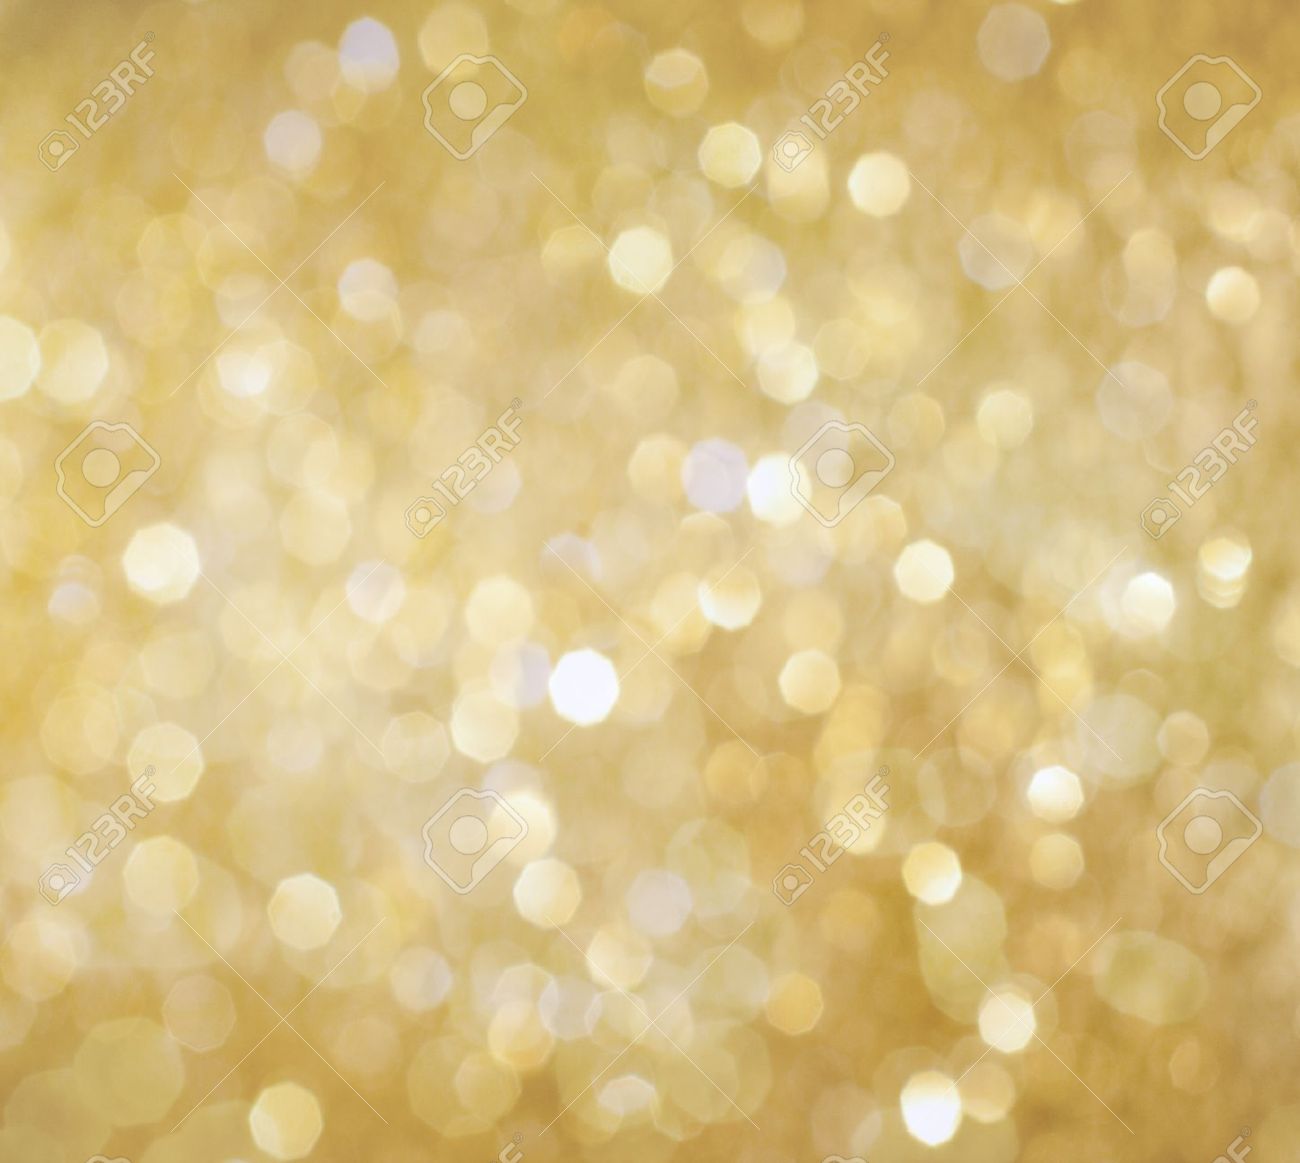 Light Gold Backgrounds Images The Art Mad Wallpapers